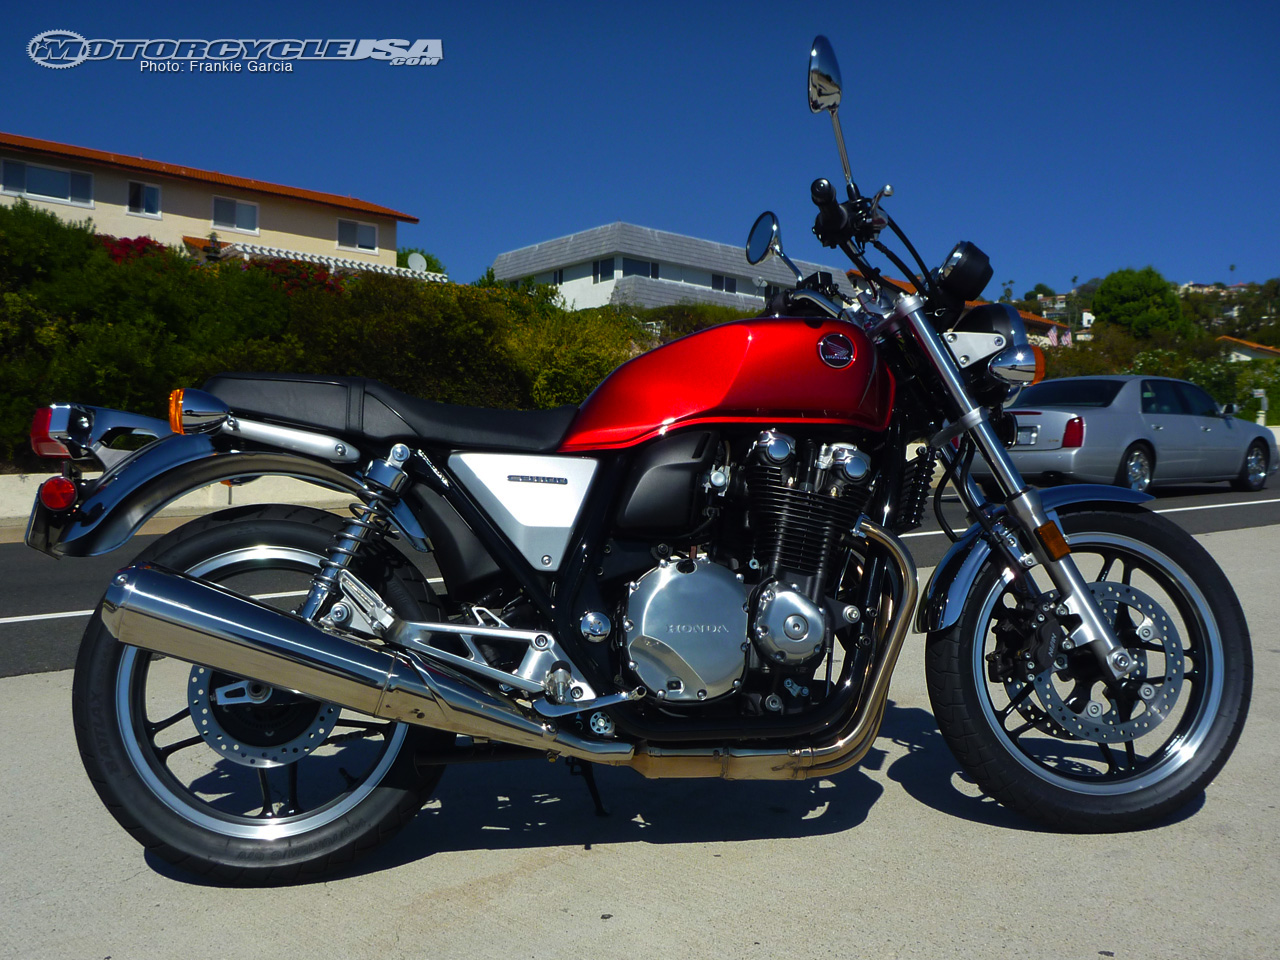 On Foreground Lonely Honda Cb1100 Stock Photo - Download Image Now